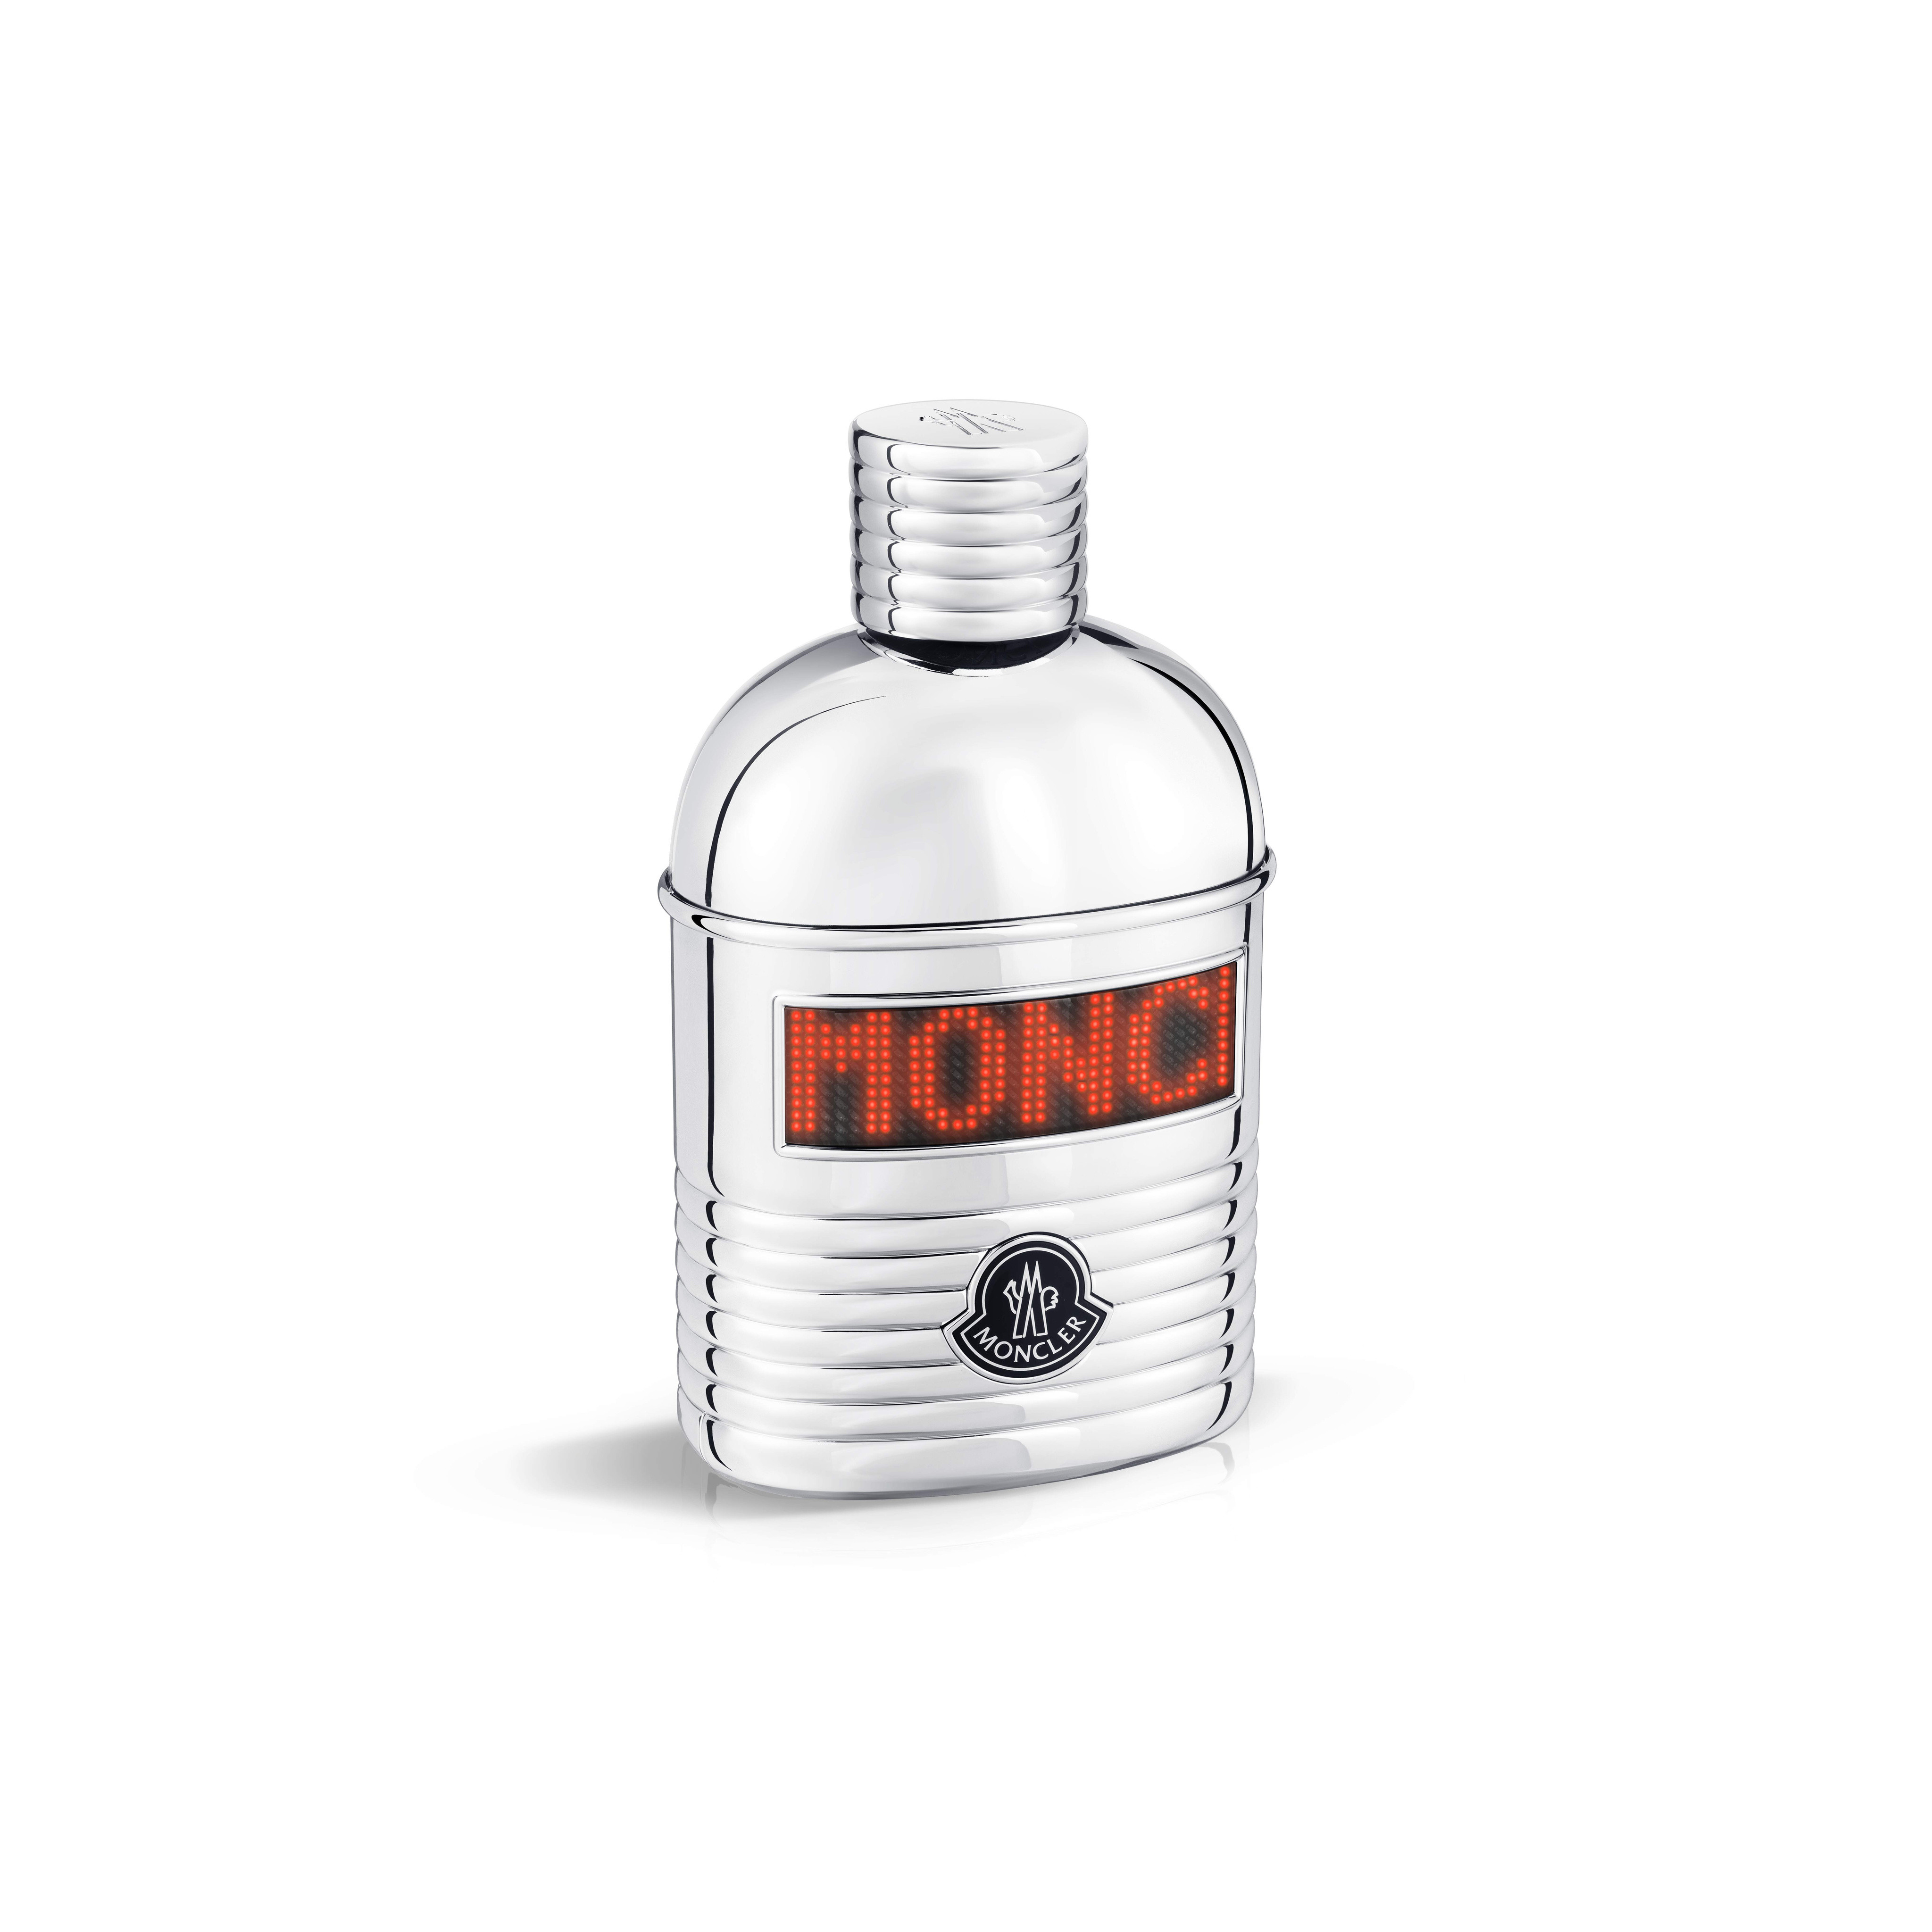 Moncler Pour Homme EDP 150ml, Bianco, large image number 3